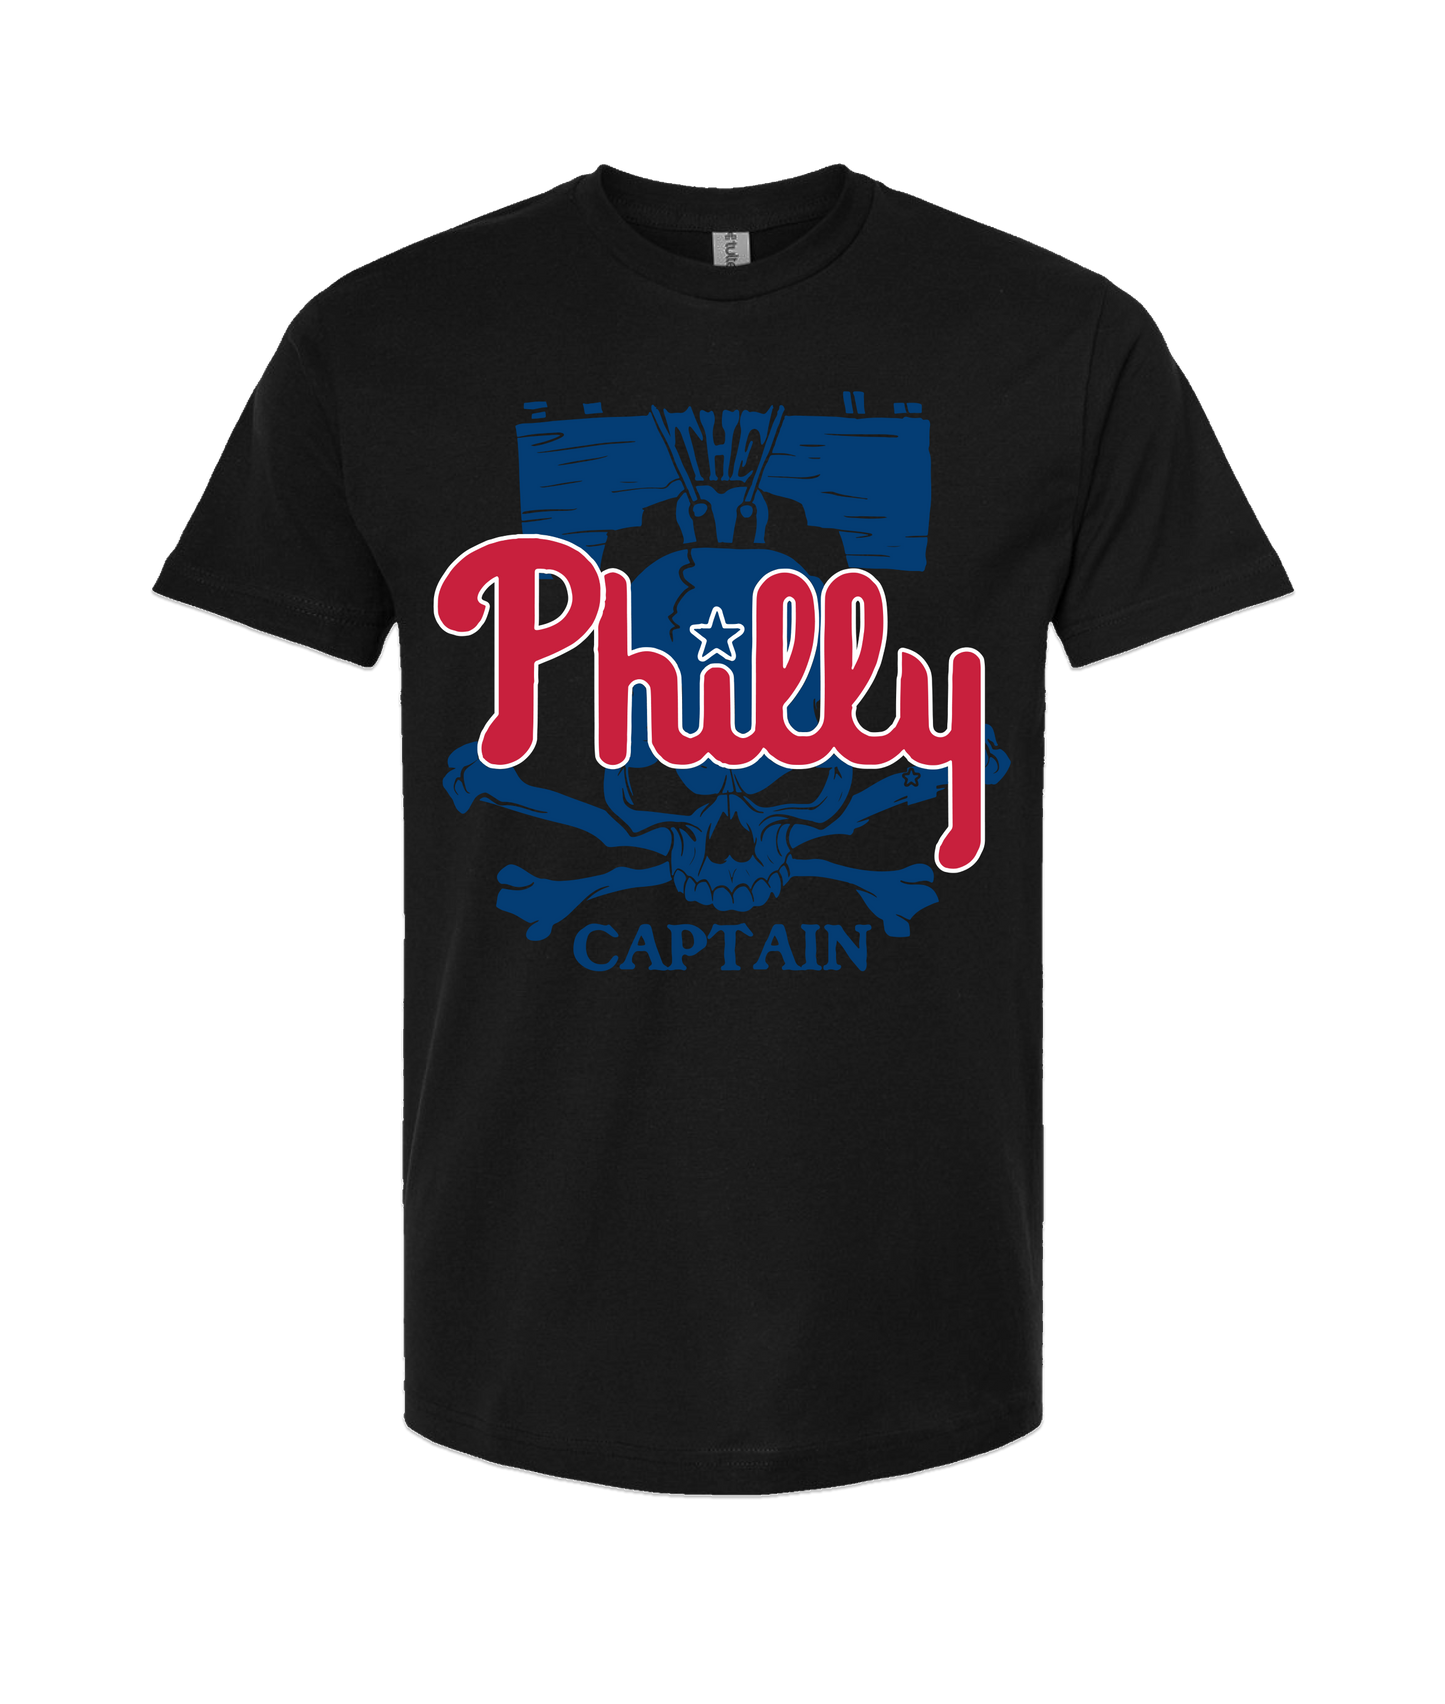 The Philly Captain's Merch is Fire - PHILLY - Black T-Shirt